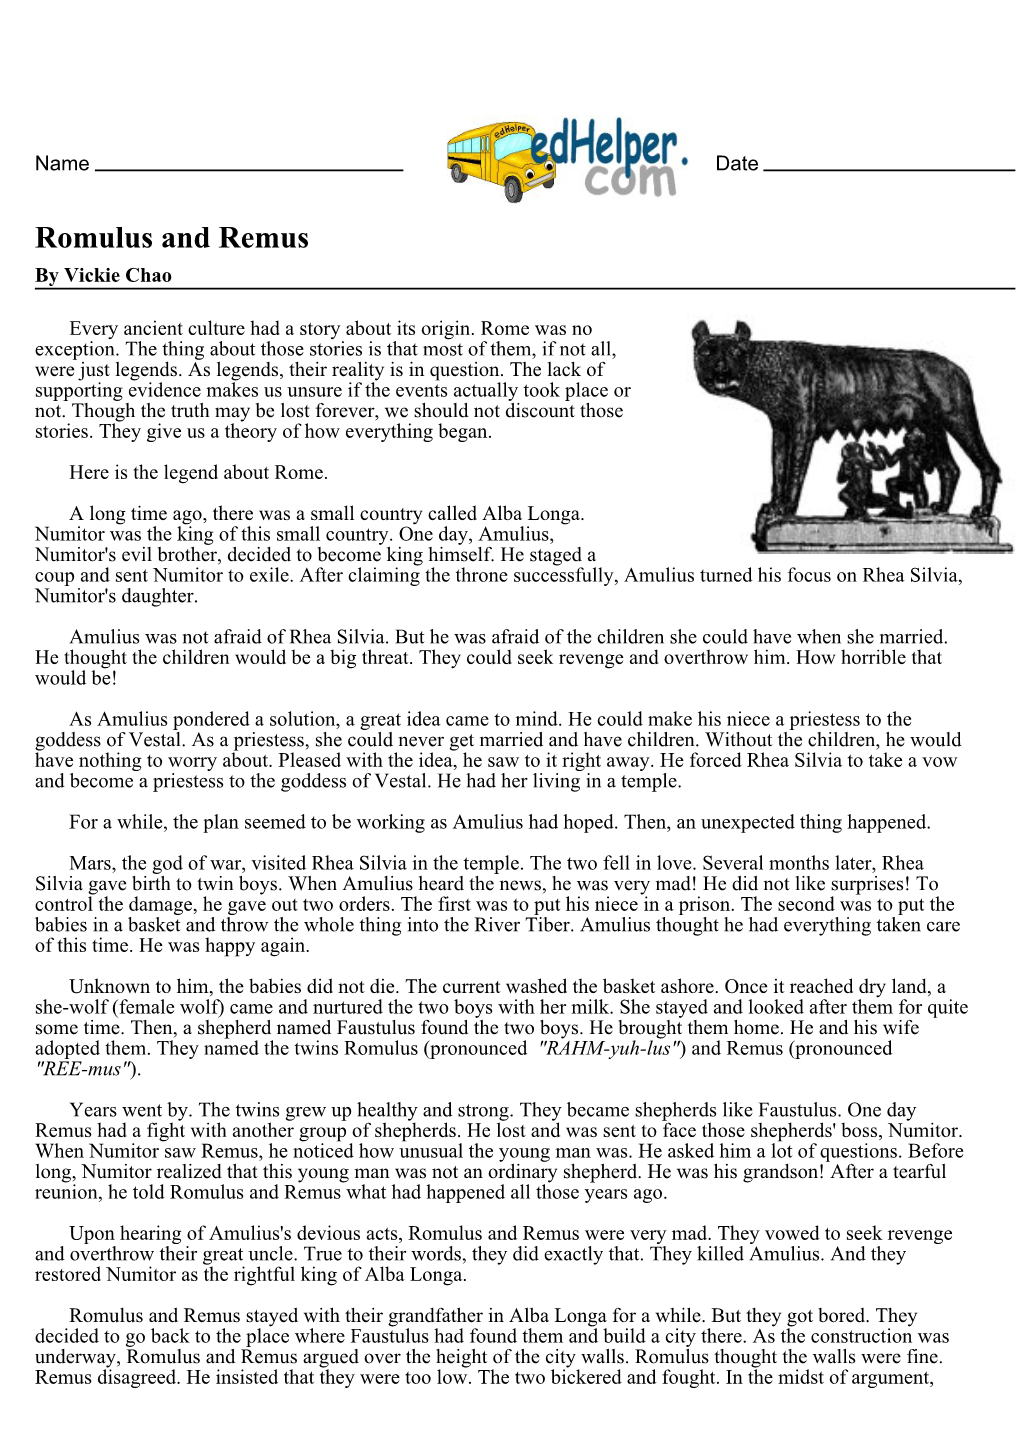 Romulus and Remus by Vickie Chao